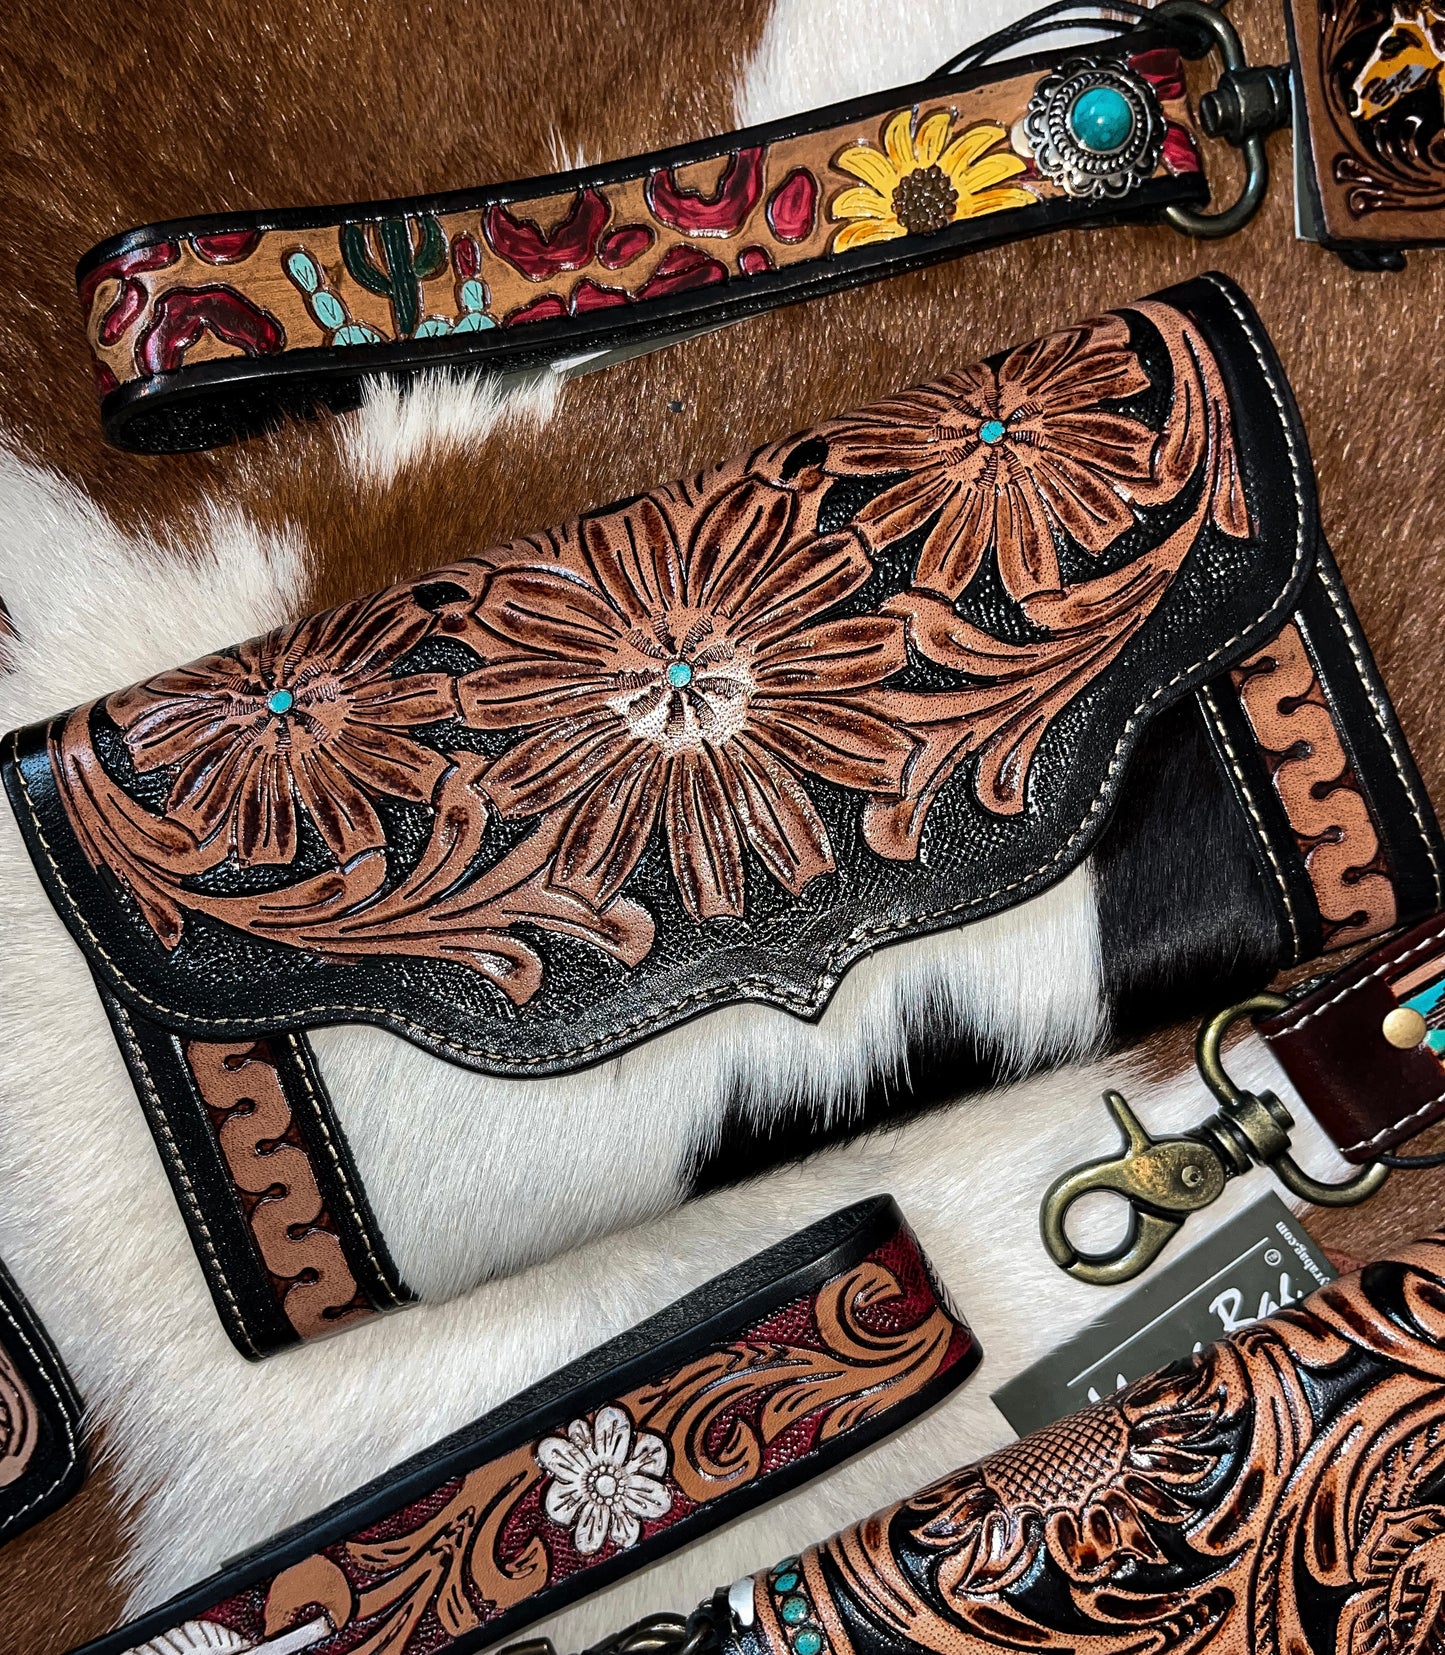 The Tooled Cowhide Wallet